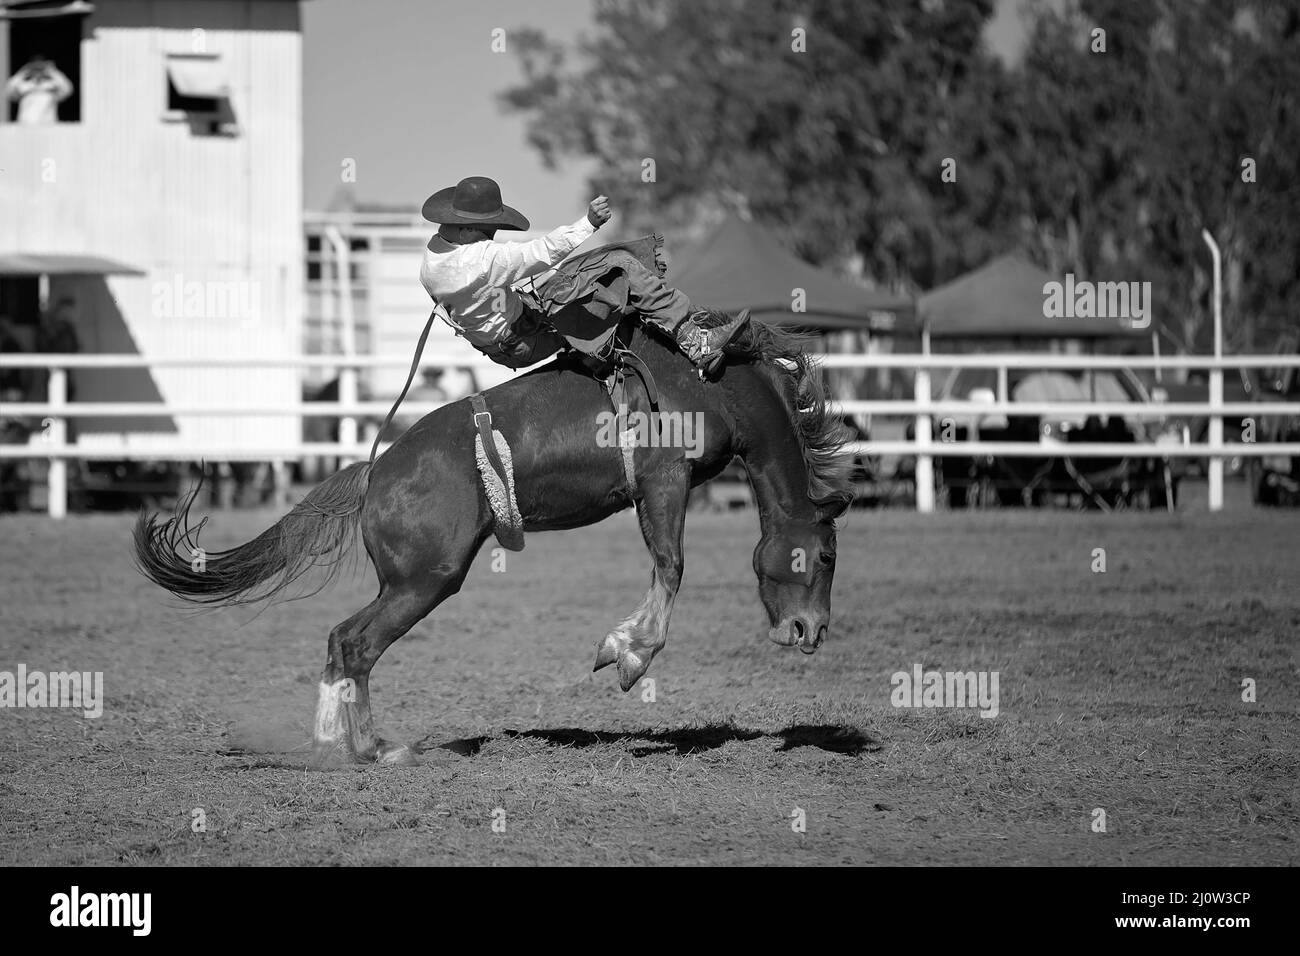 Cowboy rides a bucking horse in bareback bronc event at a country rodeo. Stock Photo